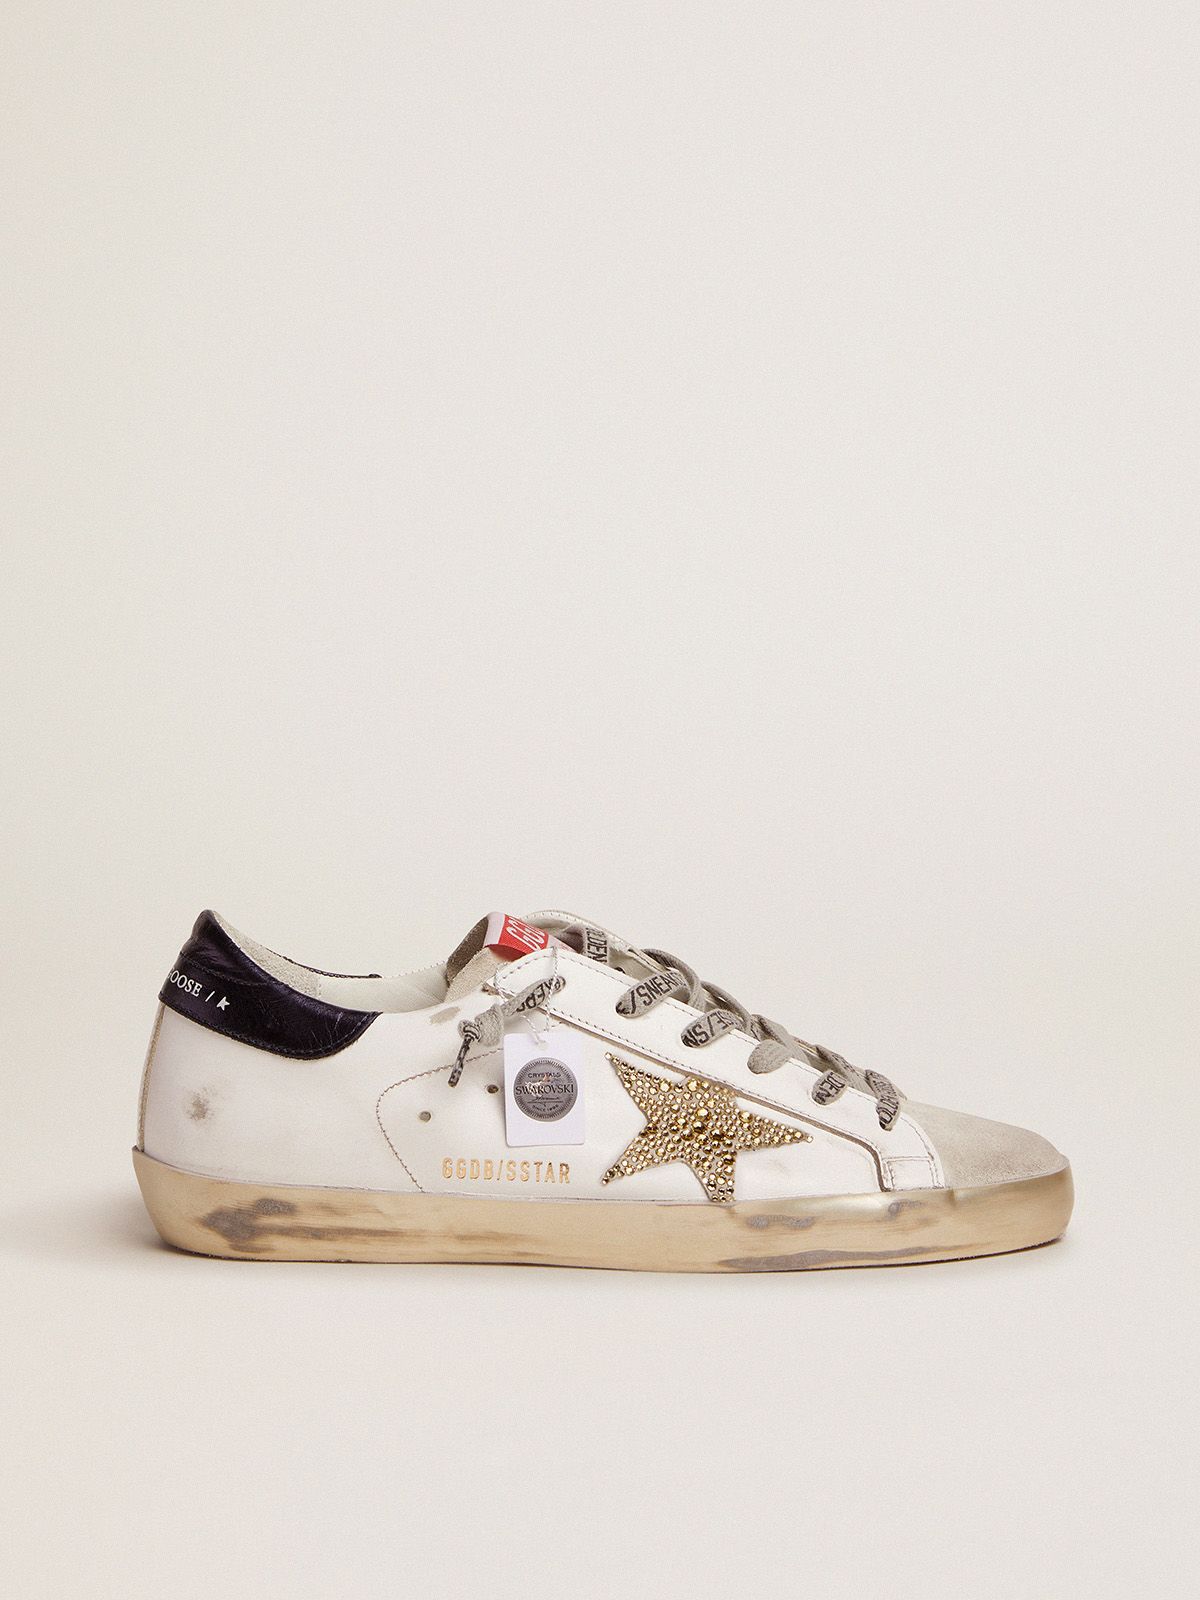 golden goose laminated leather Super-Star star crystal with and sneakers Swarovski LTD navy-blue tab heel